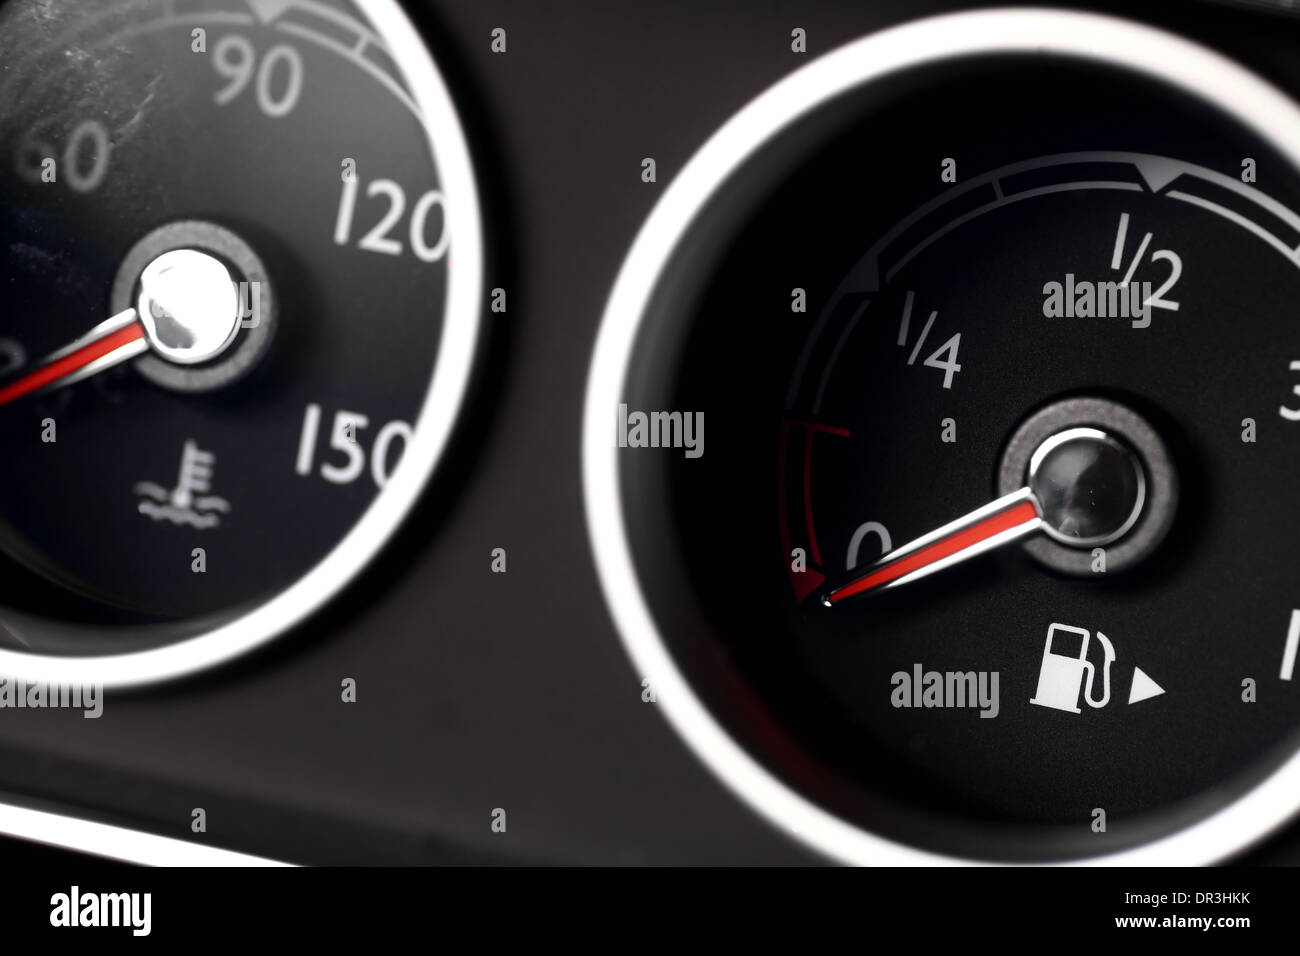 Coolant temperature and fuel level gauges on a car's dashboard Stock Photo